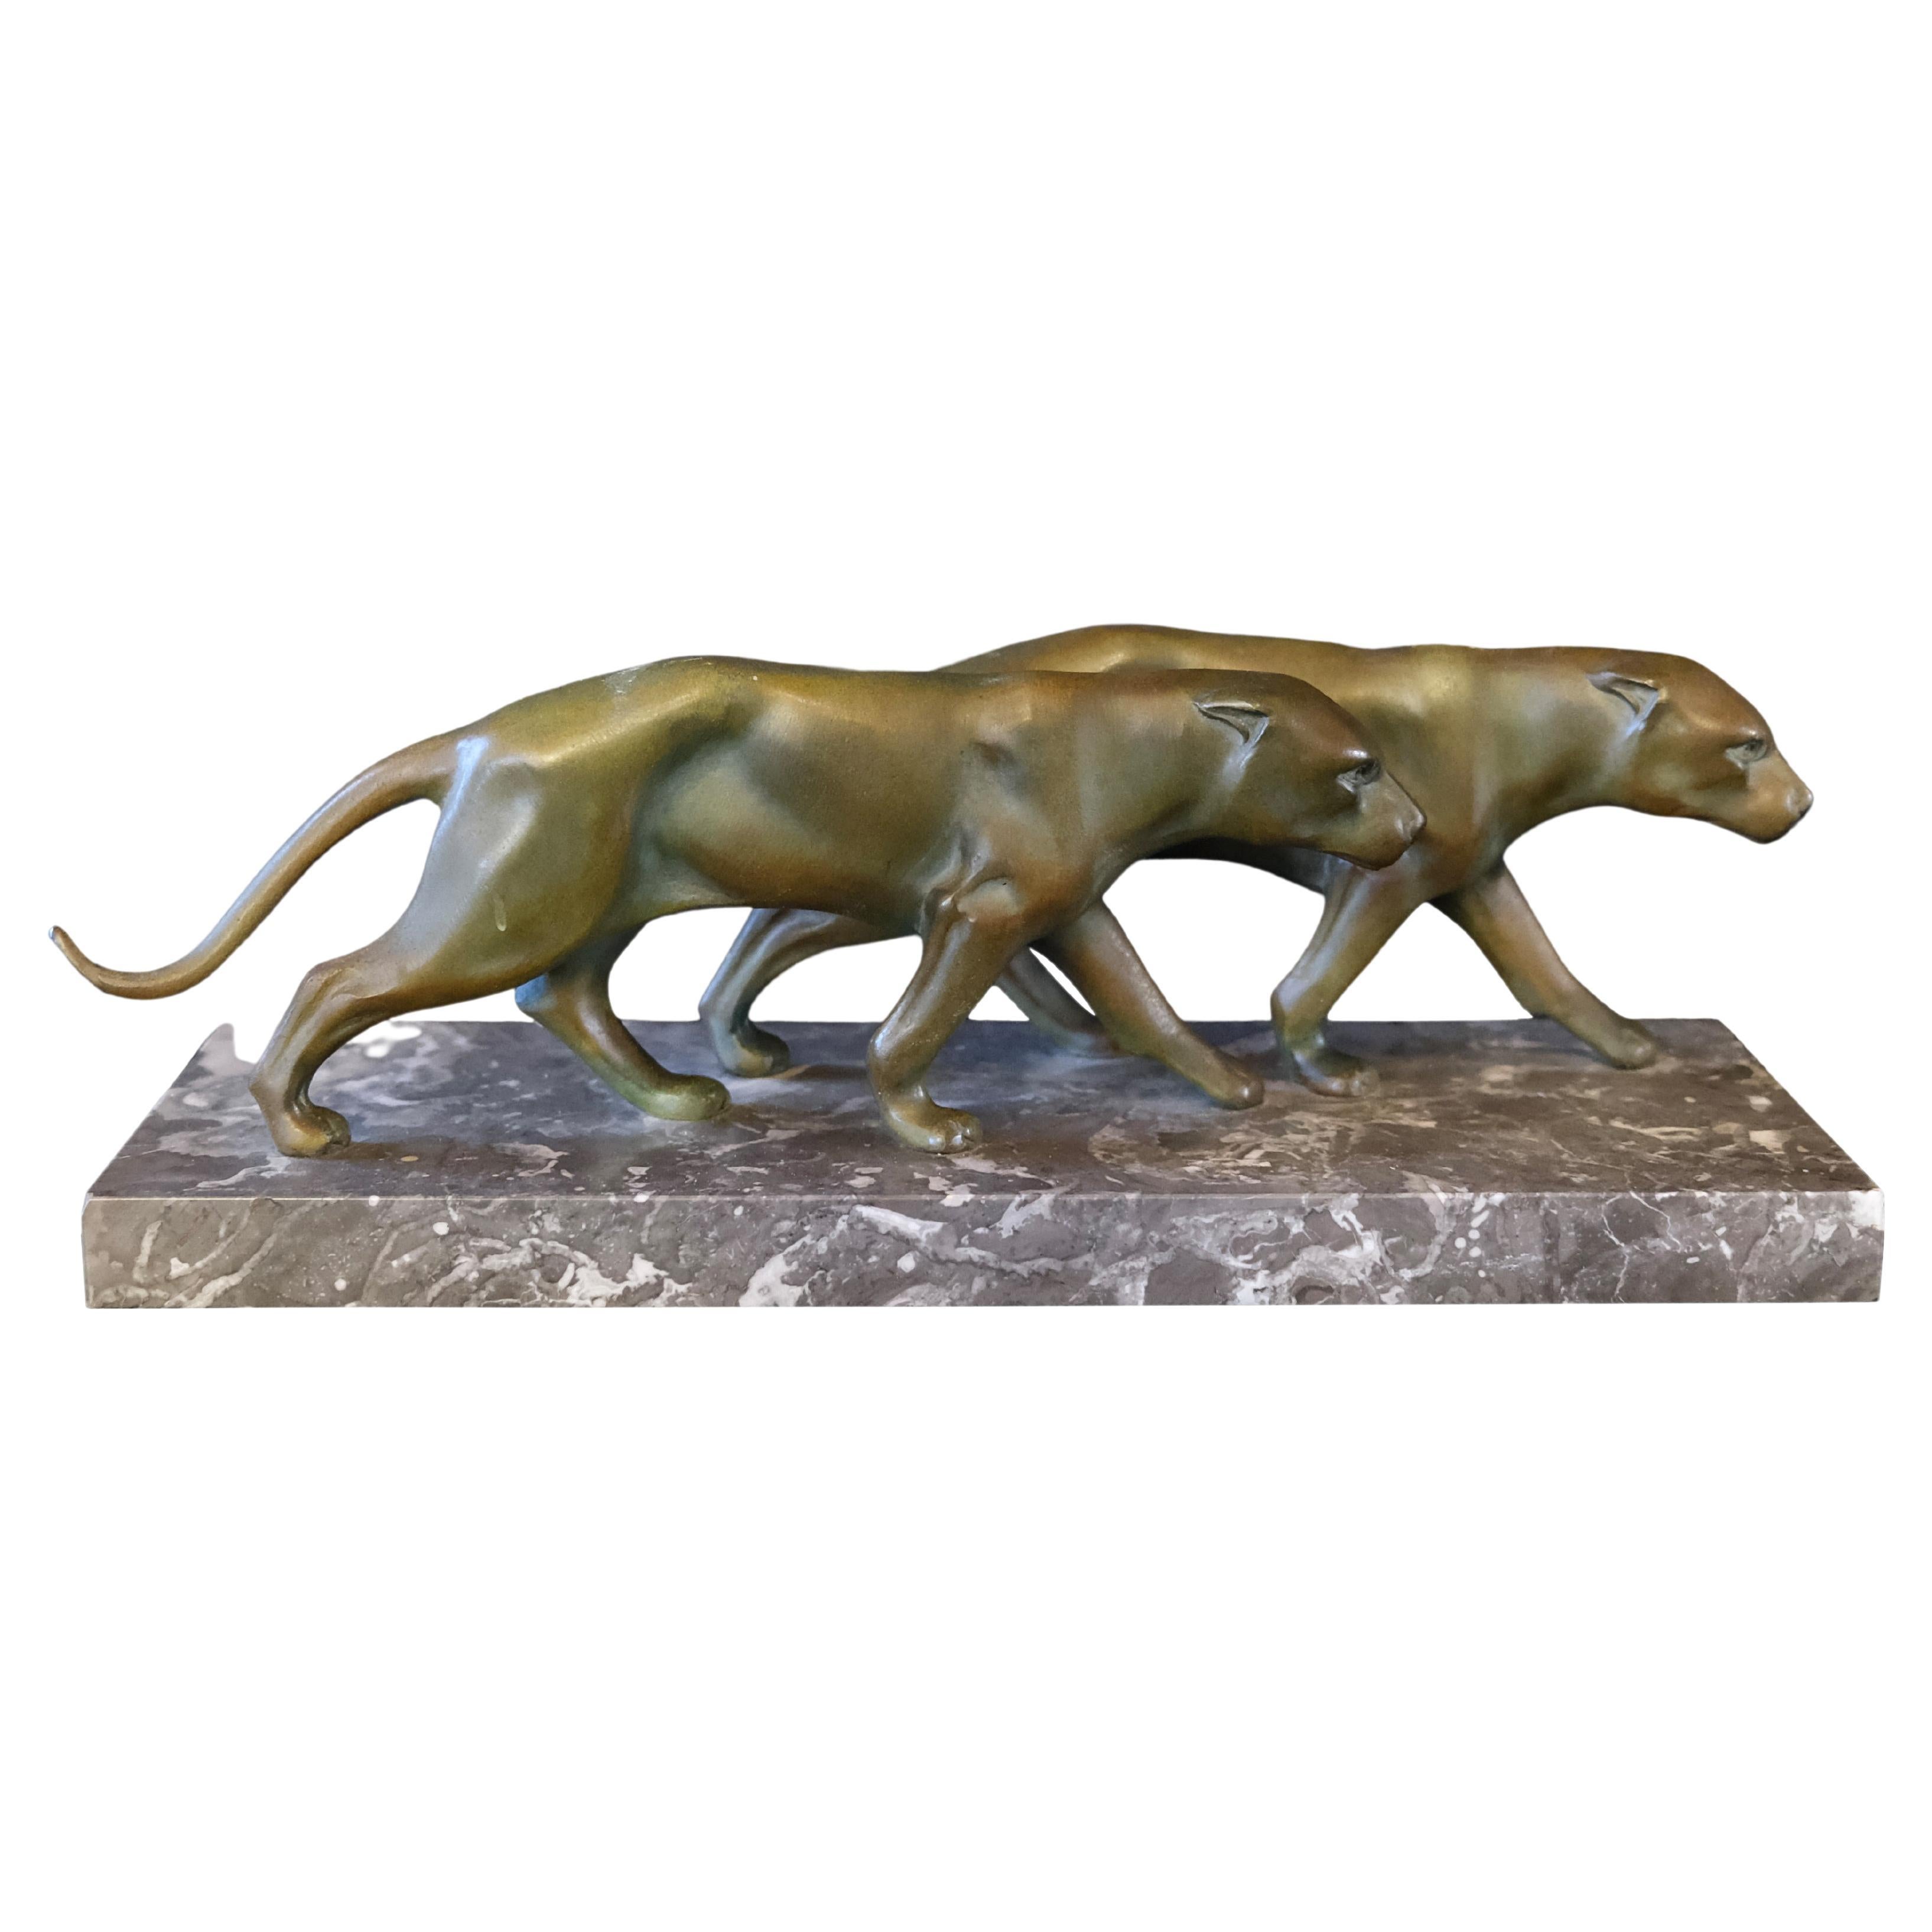 Pair of Panthers Art Deco Sculpture 1930s on Marble Base